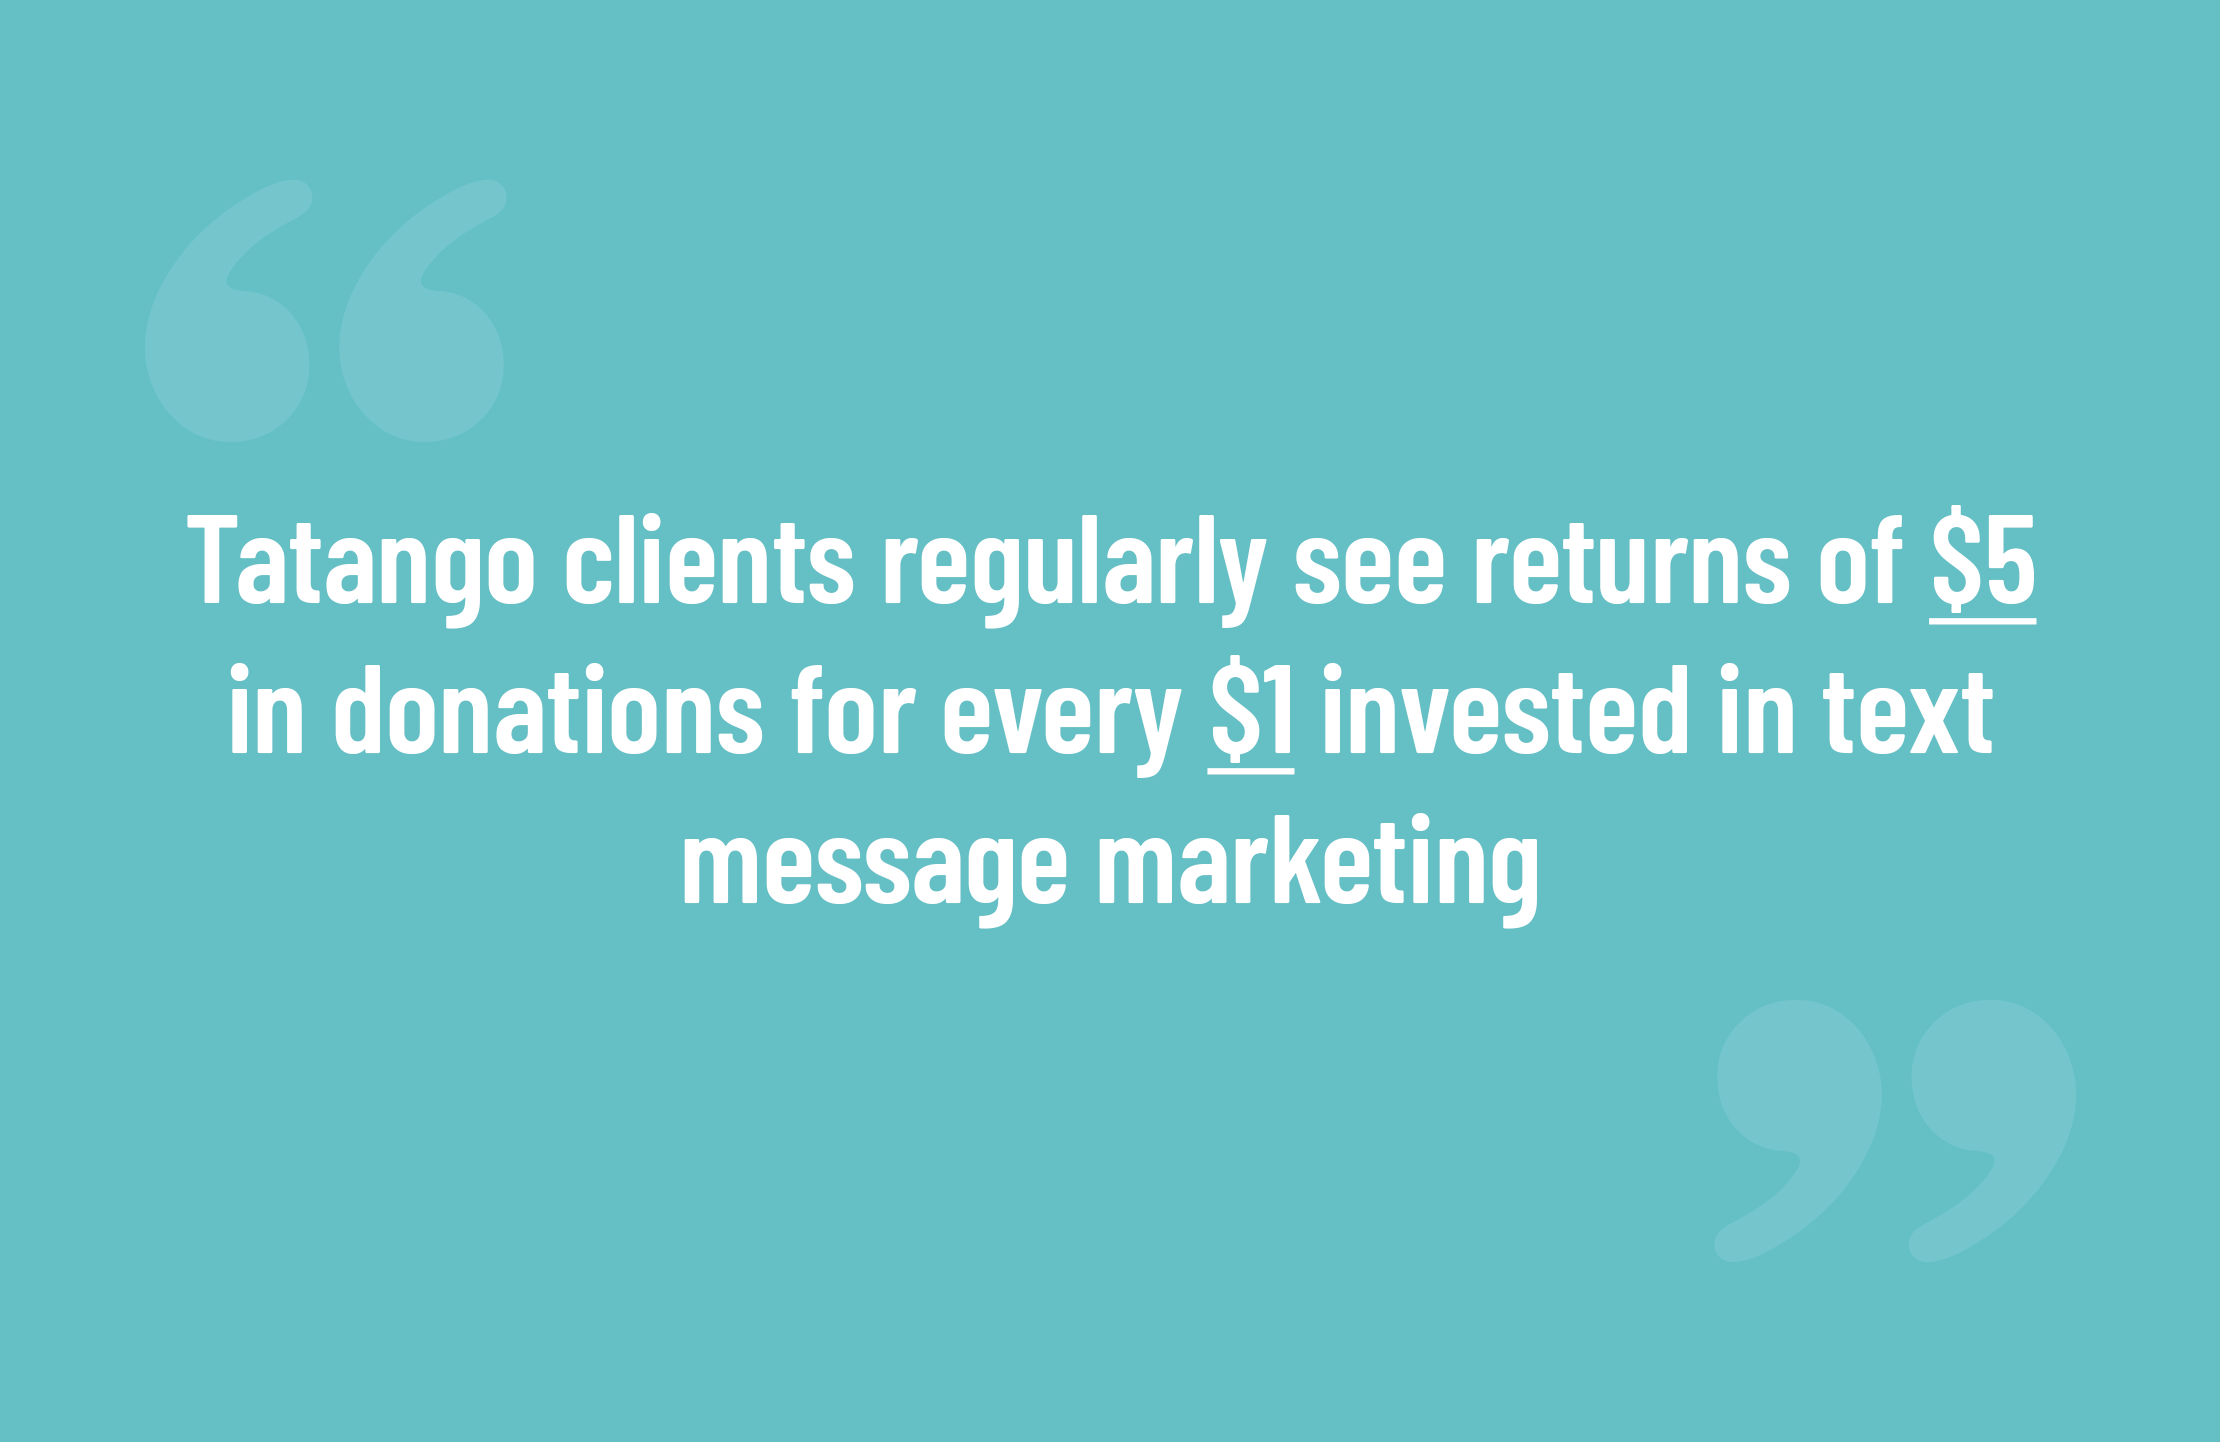 Tatango clients regularly see returns of $5 in donations for every $1 invested in text message marketing